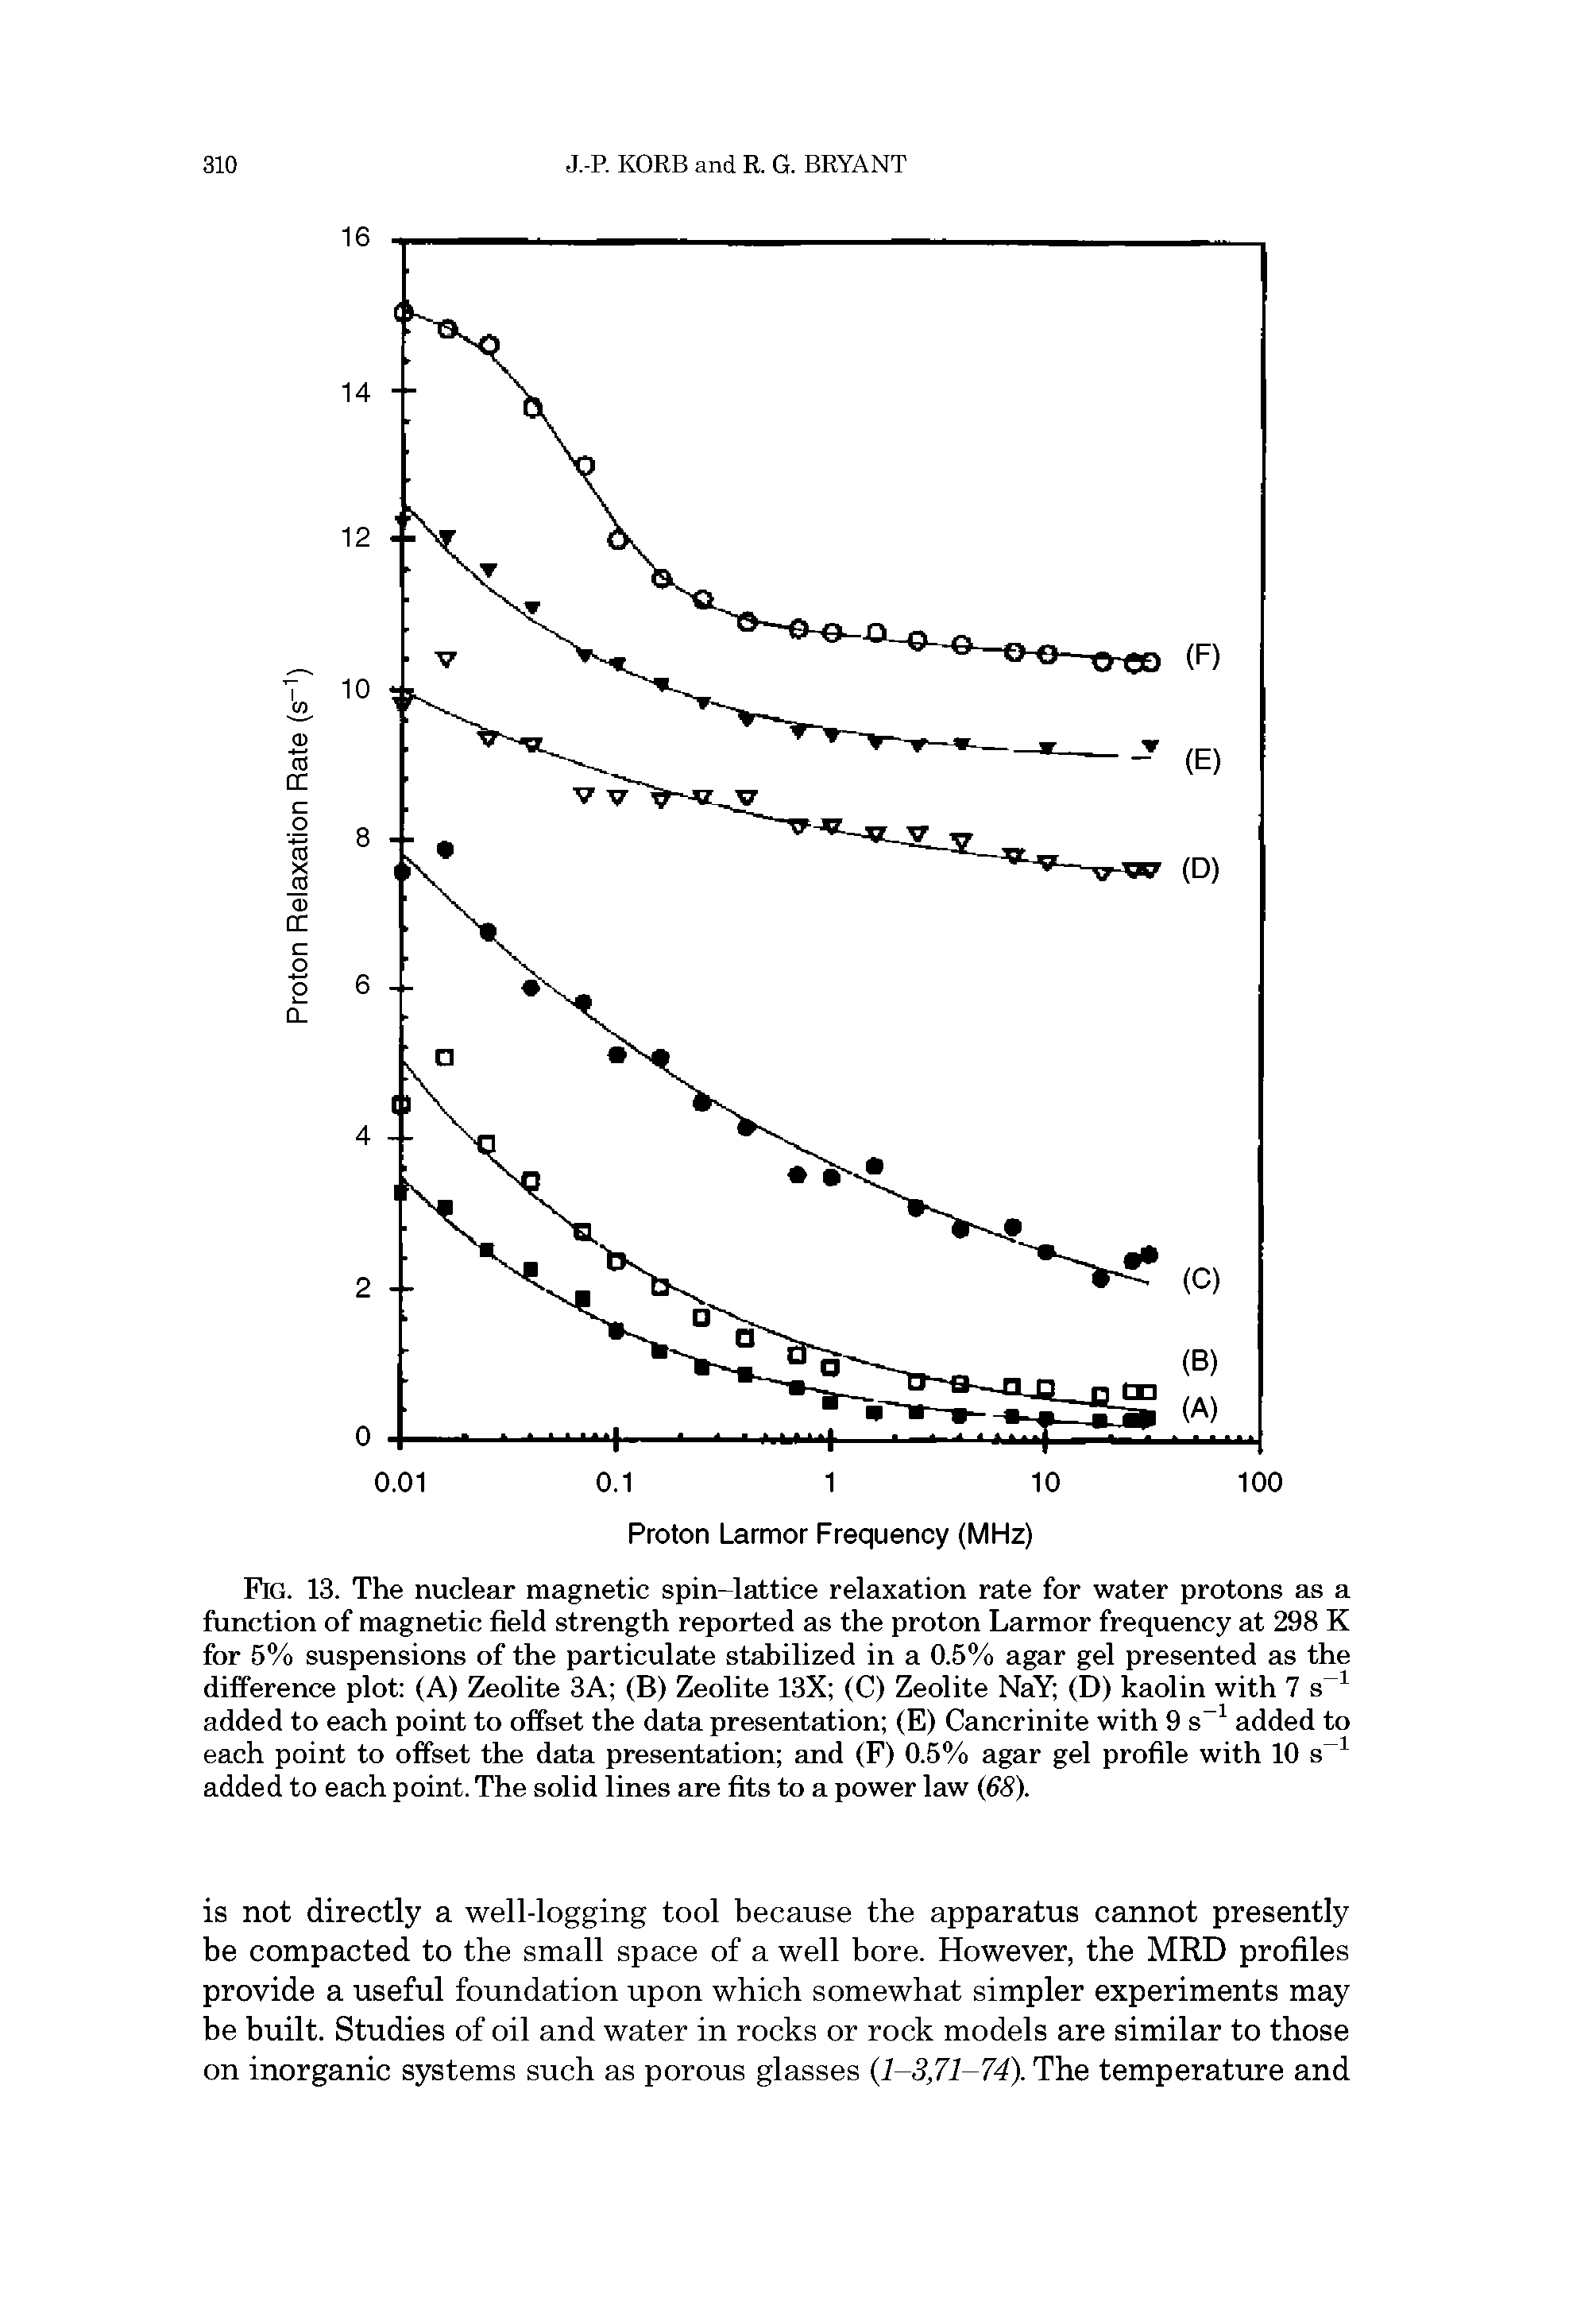 Fig. 13. The nuclear magnetic spin-lattice relaxation rate for water protons as a function of magnetic field strength reported as the proton Larmor frequency at 298 K for 5% suspensions of the particulate stabilized in a 0.5% agar gel presented as the difference plot (A) Zeolite 3A (B) Zeolite 13X (C) Zeolite NaY (D) kaolin with 7 s added to each point to offset the data presentation (E) Cancrinite with 9 s added to each point to offset the data presentation and (F) 0.5% agar gel profile with 10 s added to each point. The solid lines are fits to a power law (68).